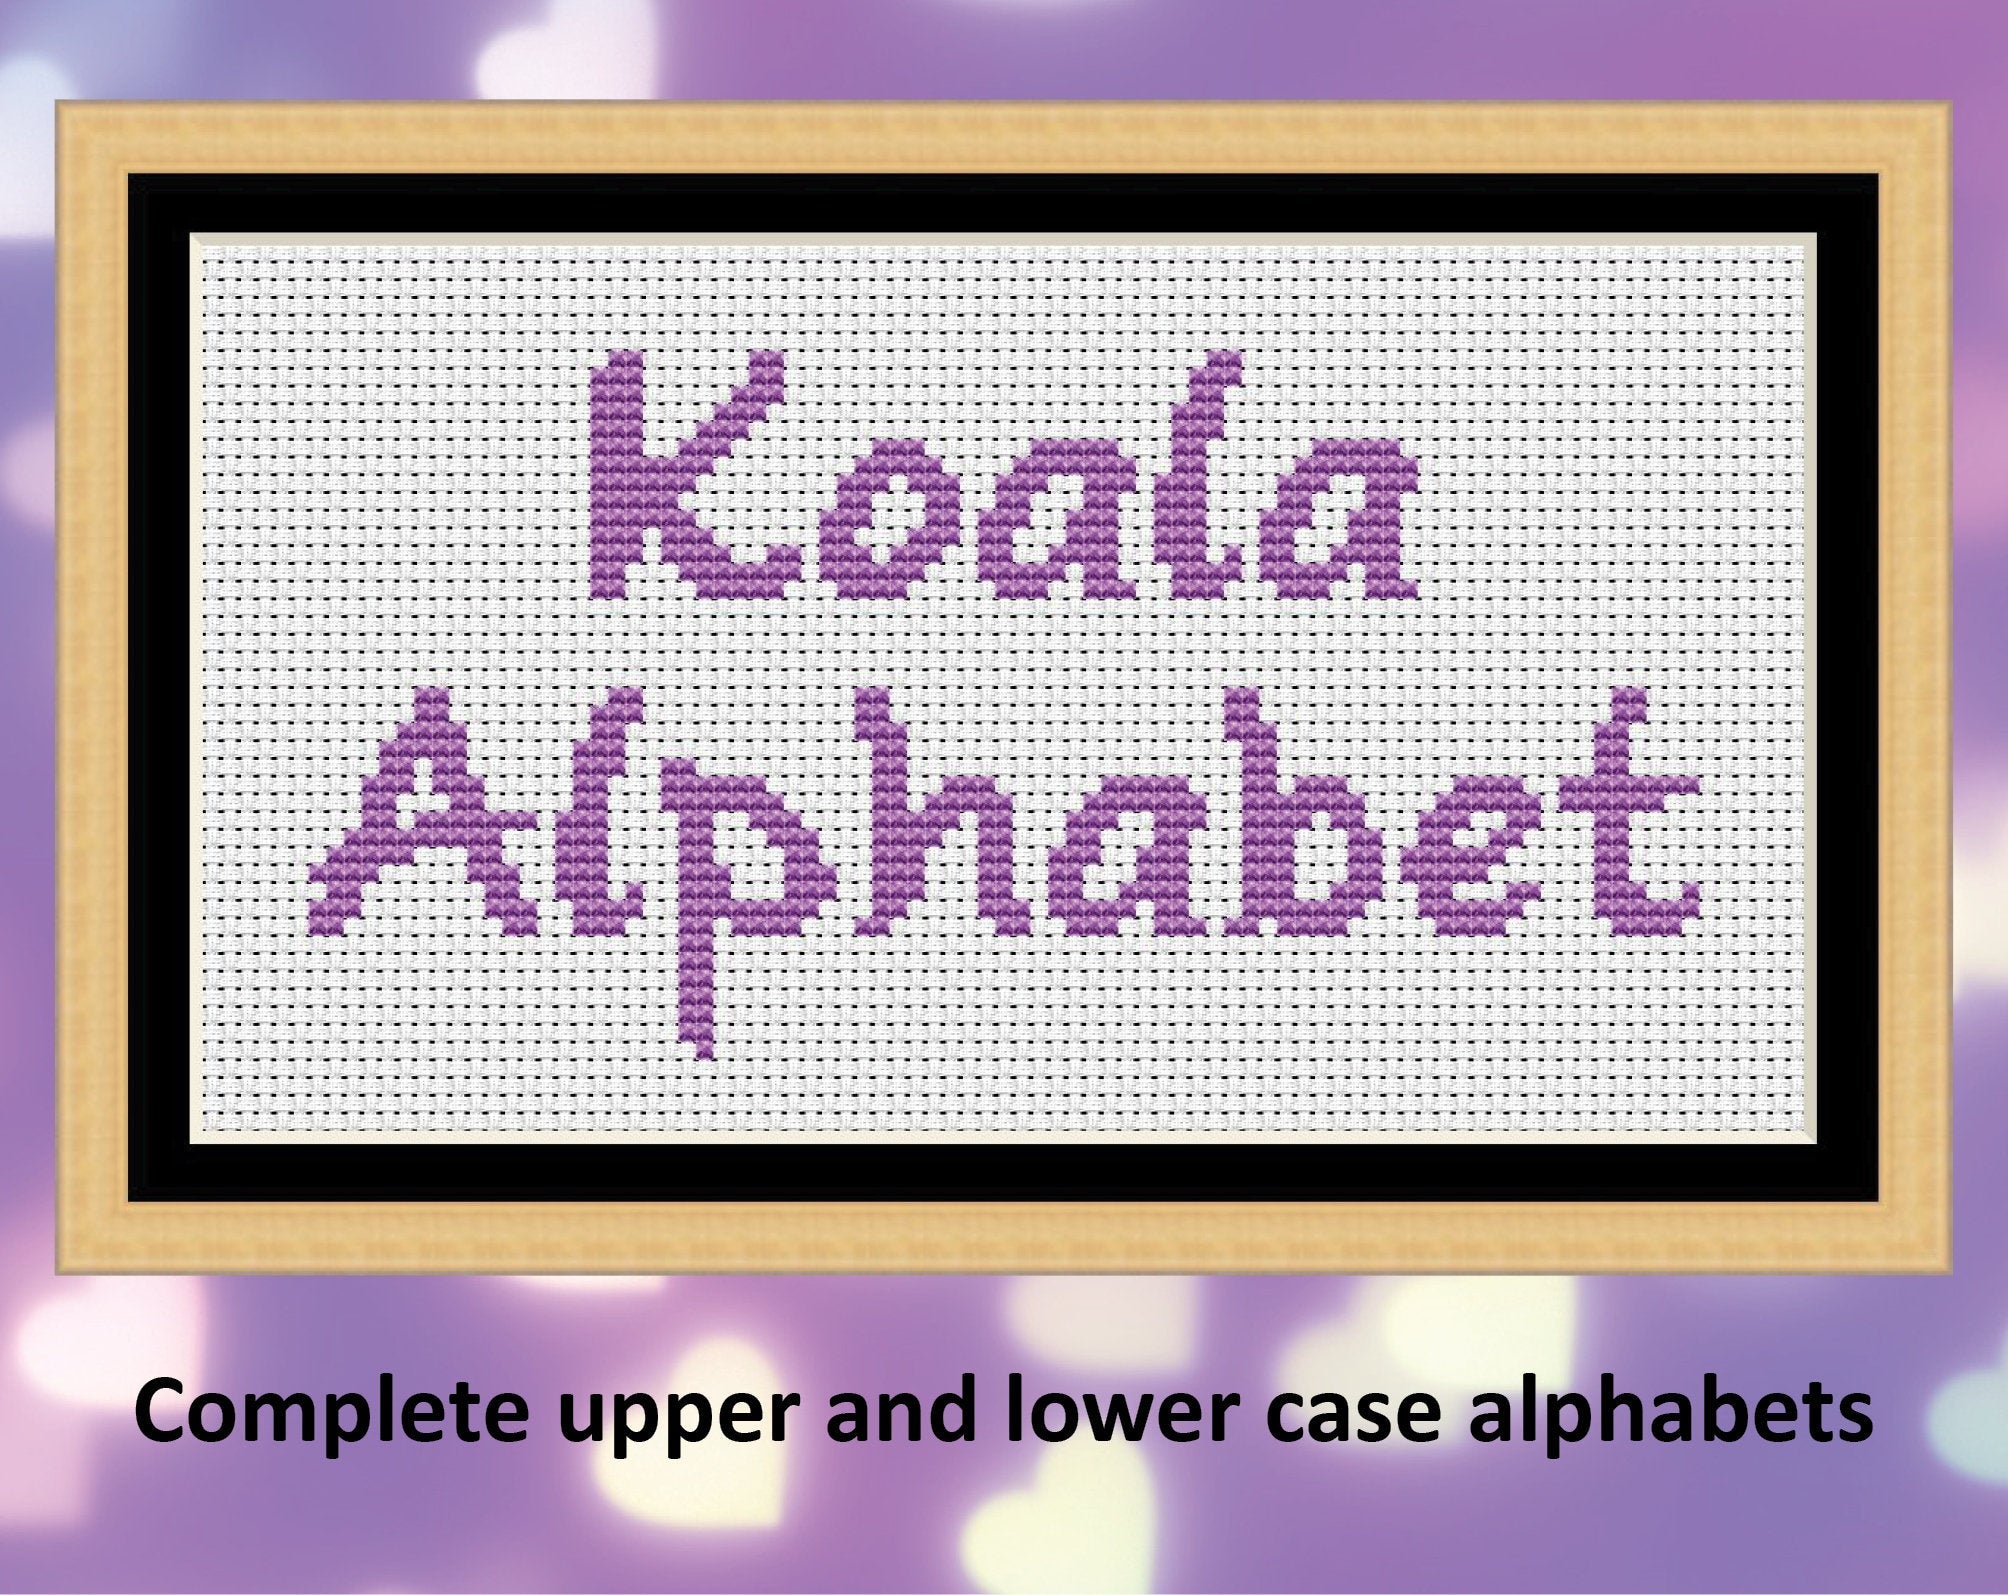 Koala Alphabet - complete upper and lower case cross stitch font - text showing the letters for 'Koala Alphabet'